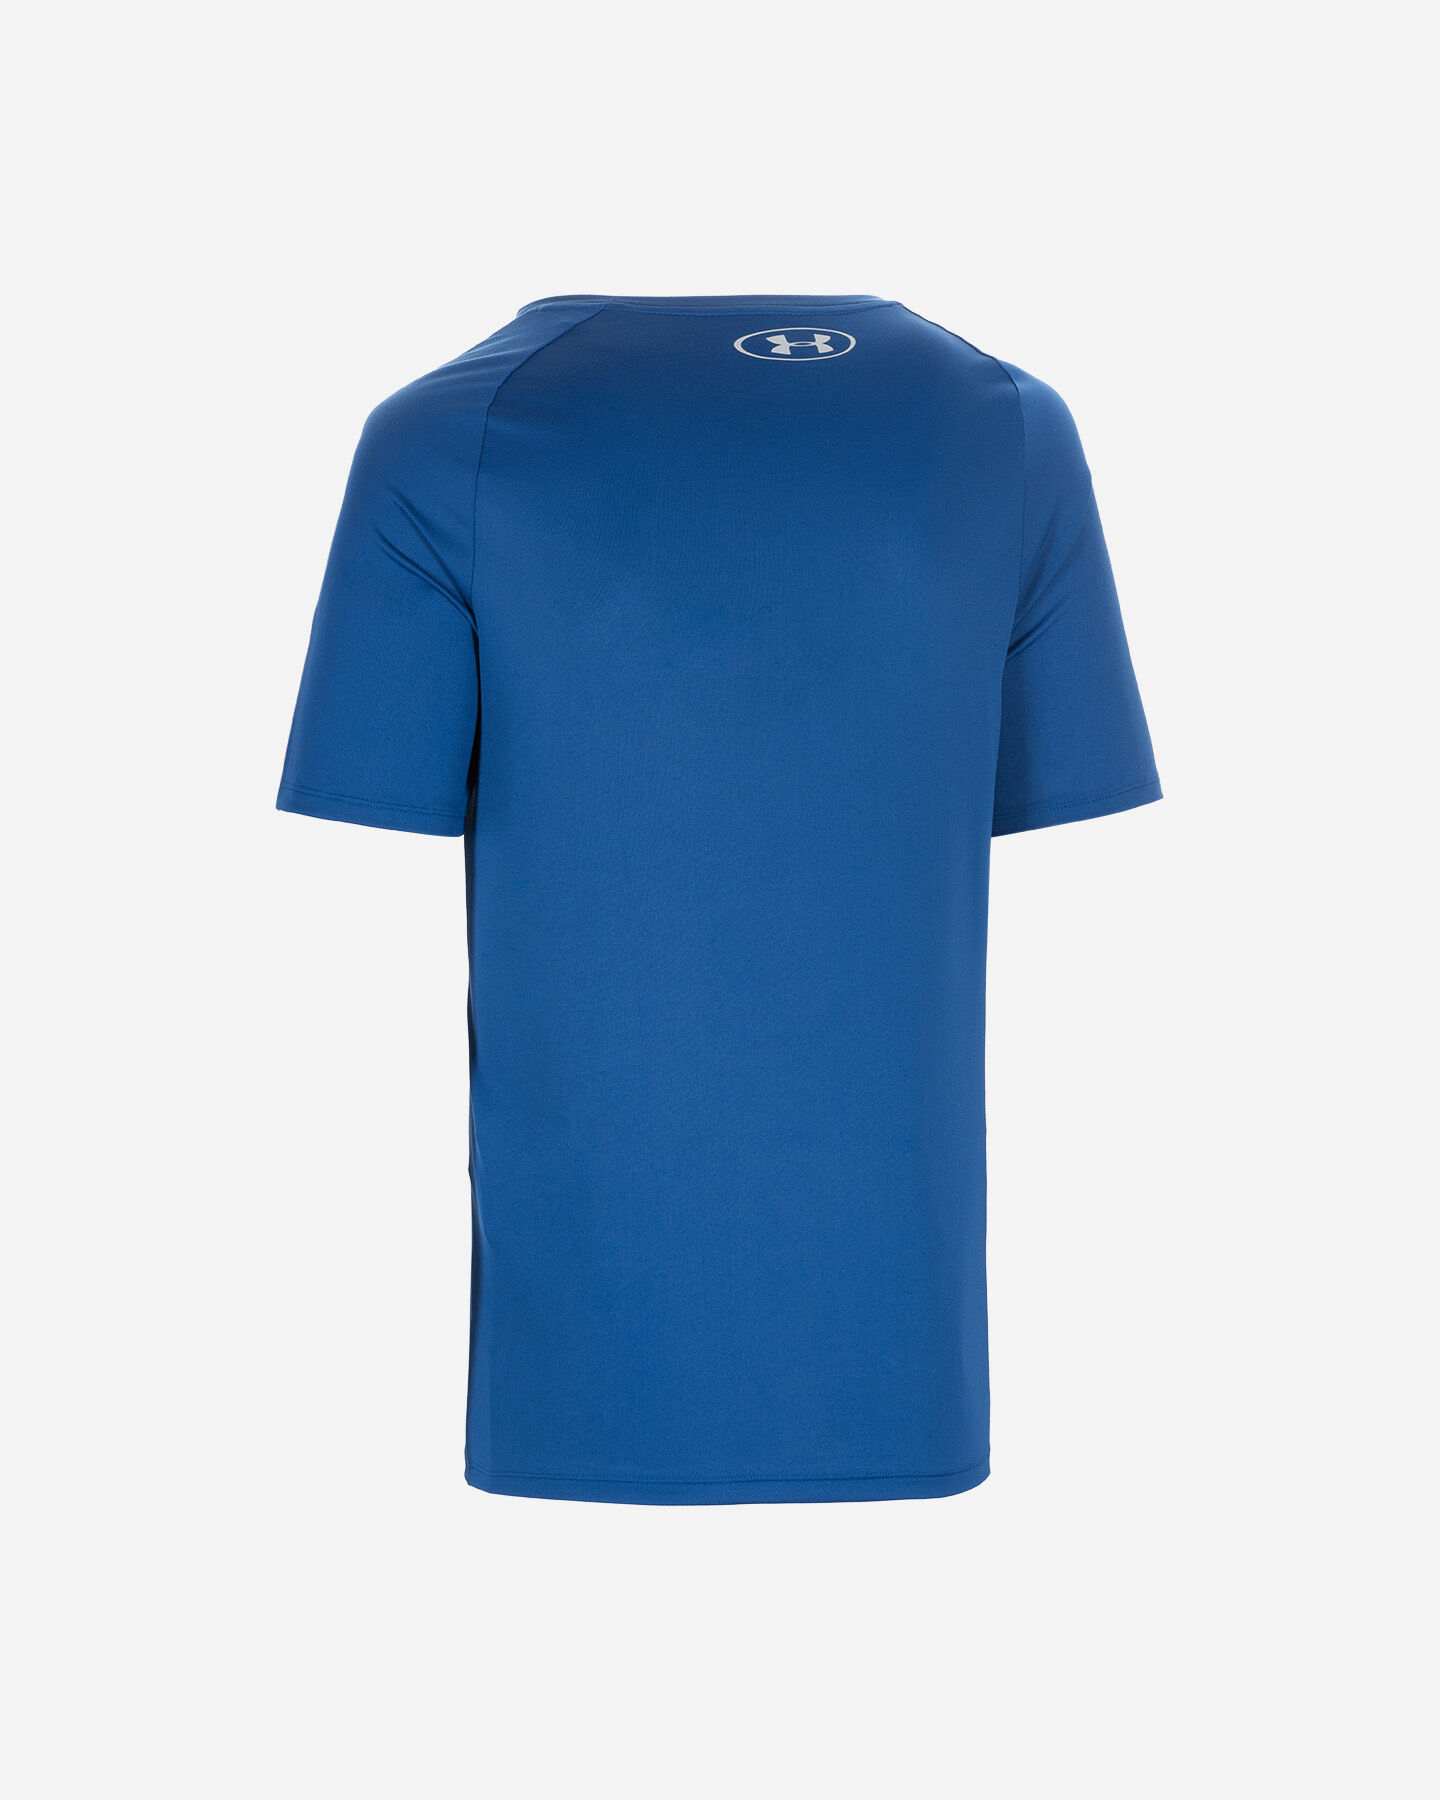  T-Shirt training UNDER ARMOUR TECH 2.0 VIBE M S5169406|0449|XS scatto 1